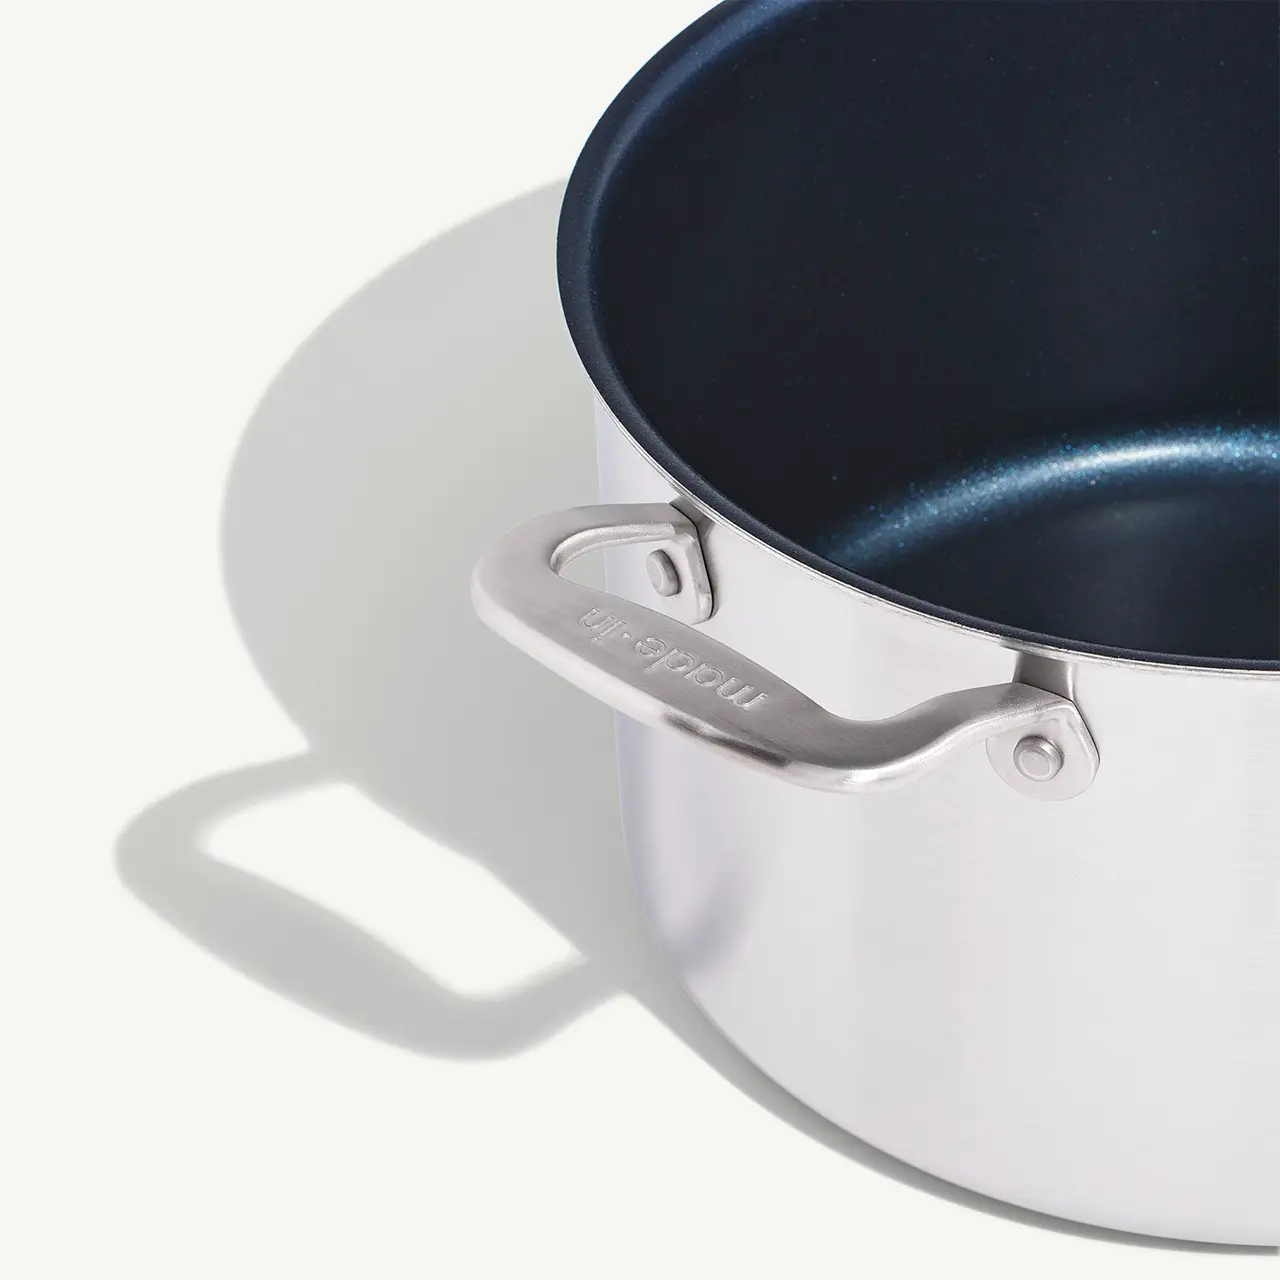 A stainless steel pot with a blue interior casts a shadow on a white surface, highlighting its shiny handle with the word "Induction" engraved on it.